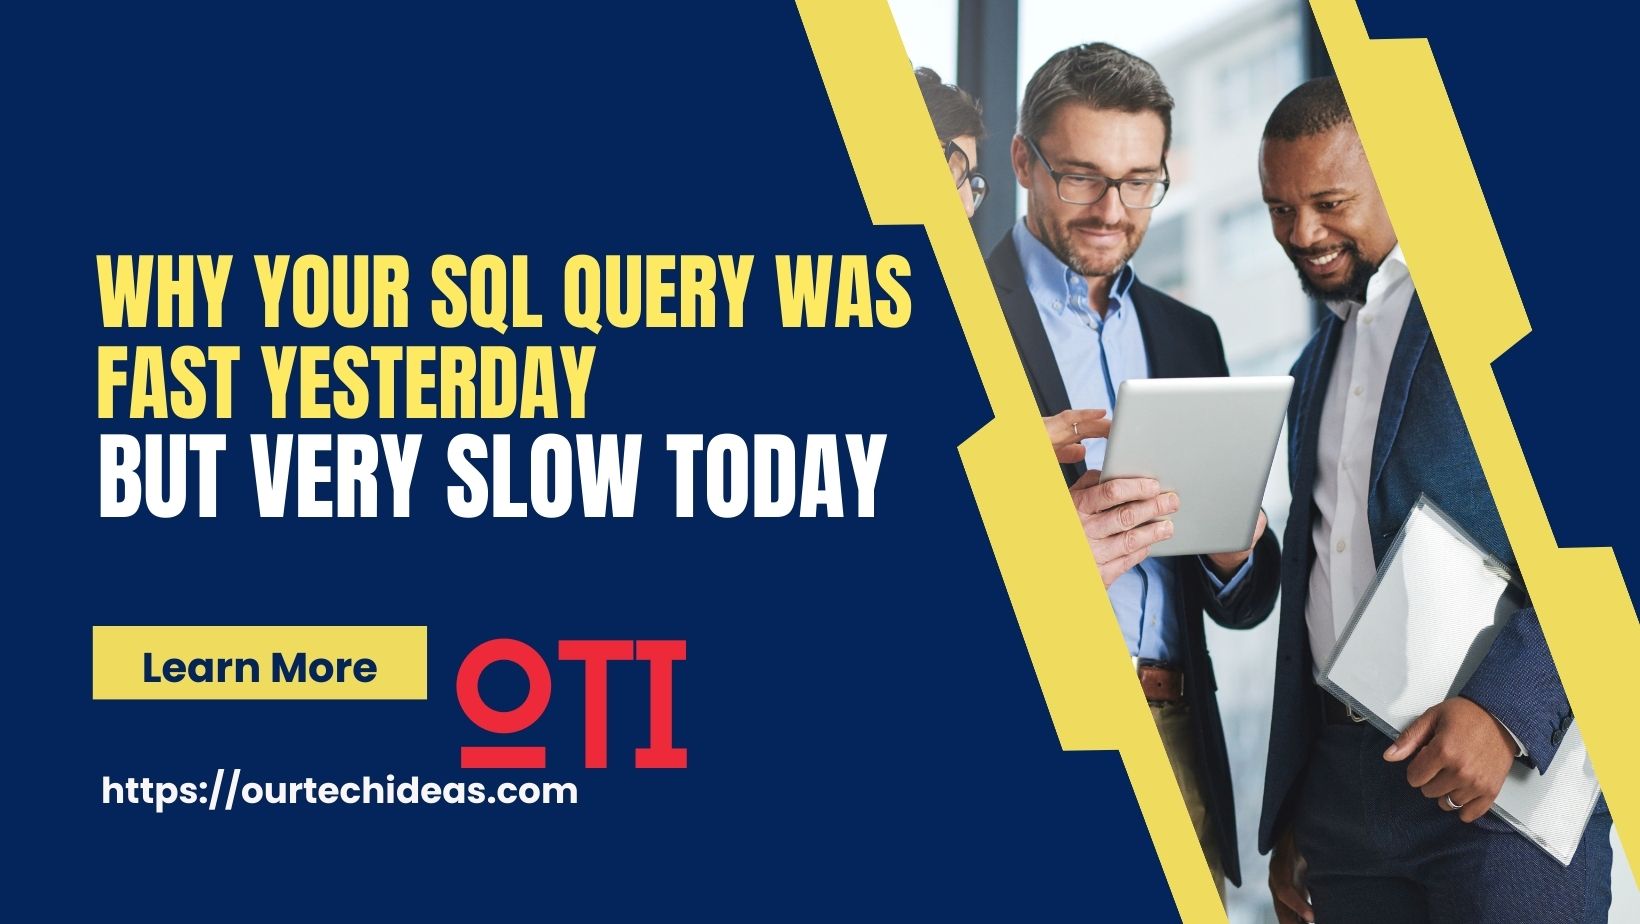 Why Your SQL Query Was Fast Yesterday but Very Slow Today